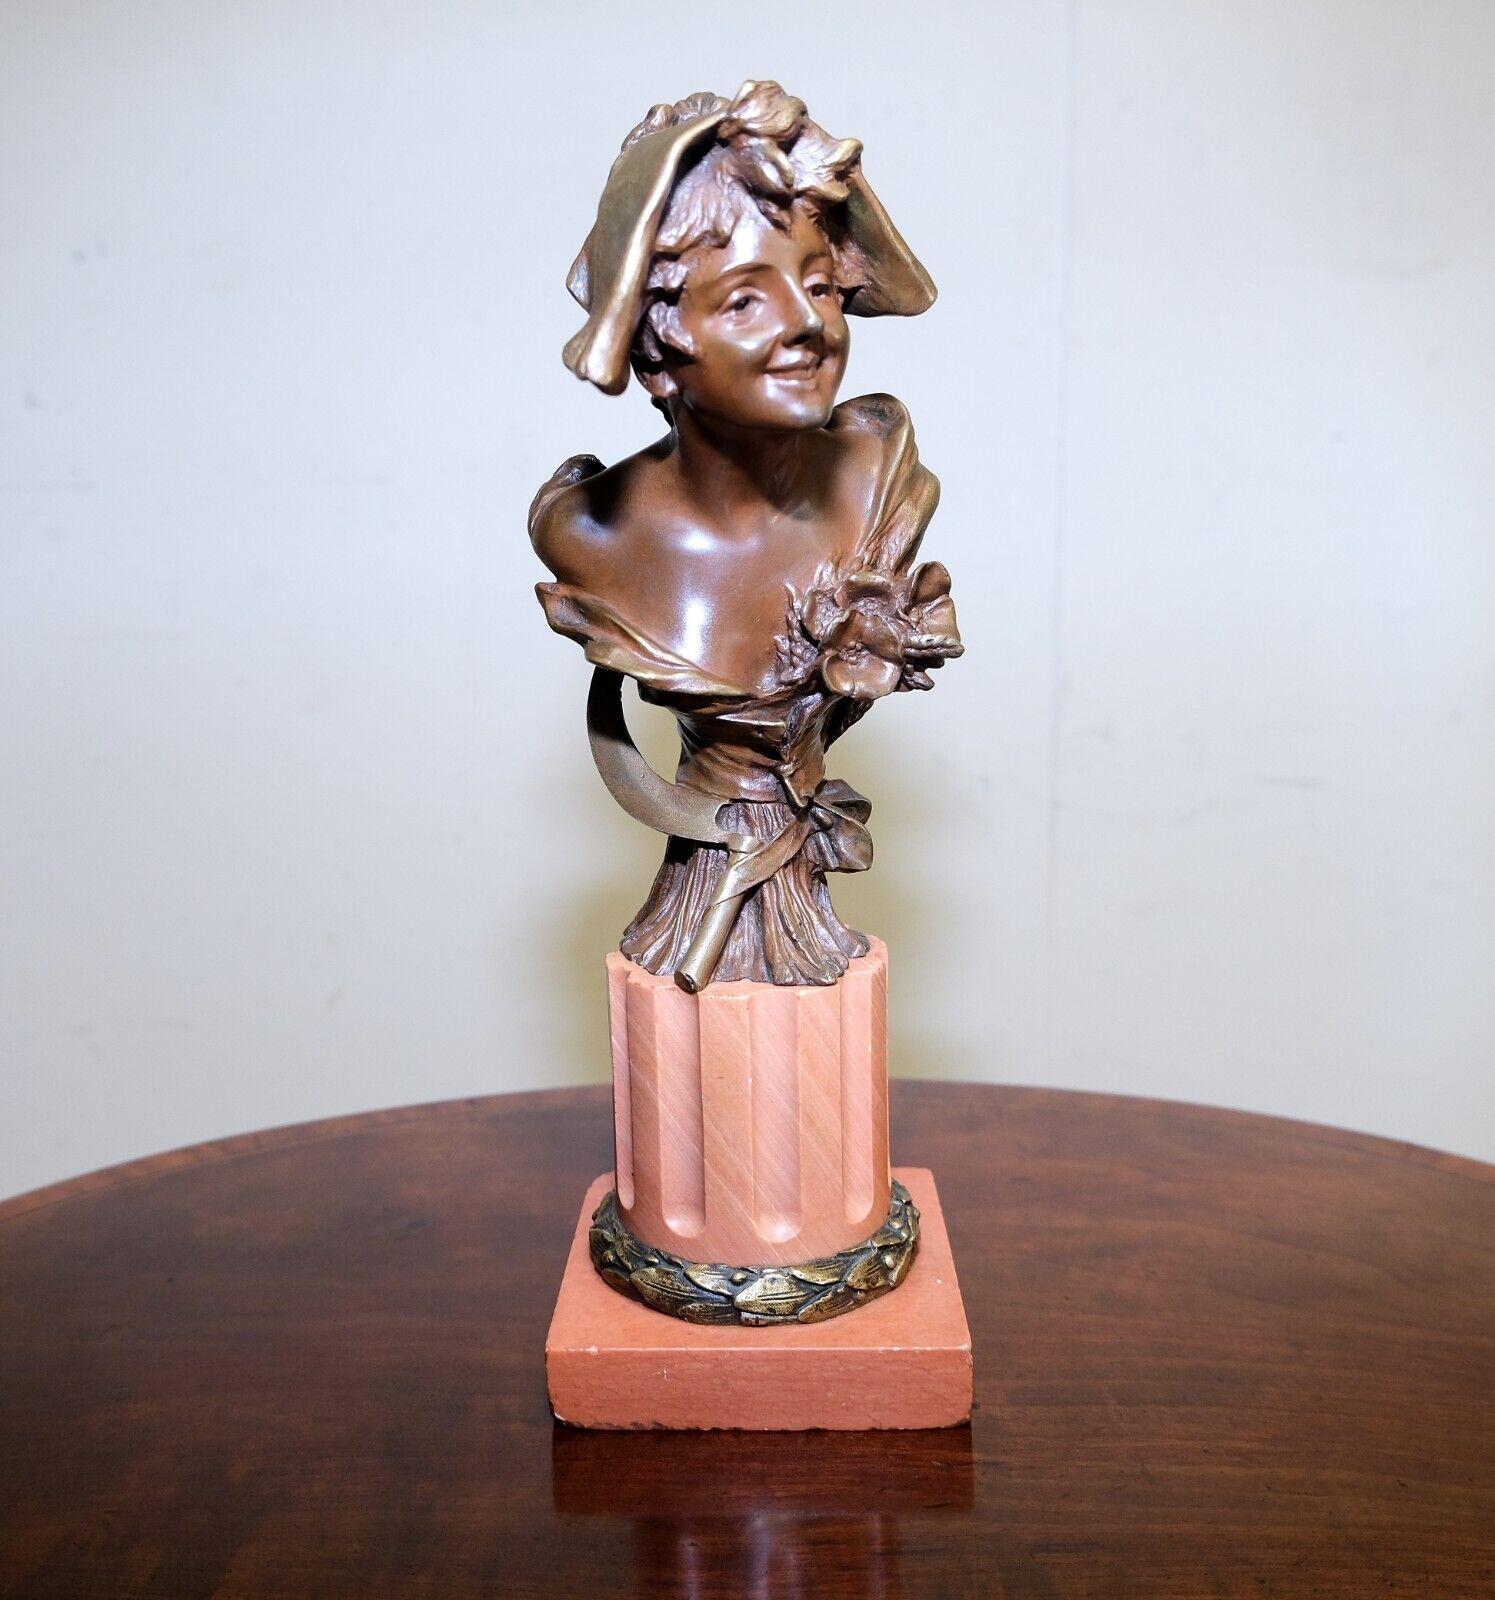 We are delighted to offer for sale this stunning Art Nouveau bronze by great Belgian designer Georges Van Der Straeten.

This astonishing and original bust and gilt patinated, Summer lady with her bodice adorned with flowers. Standing on a